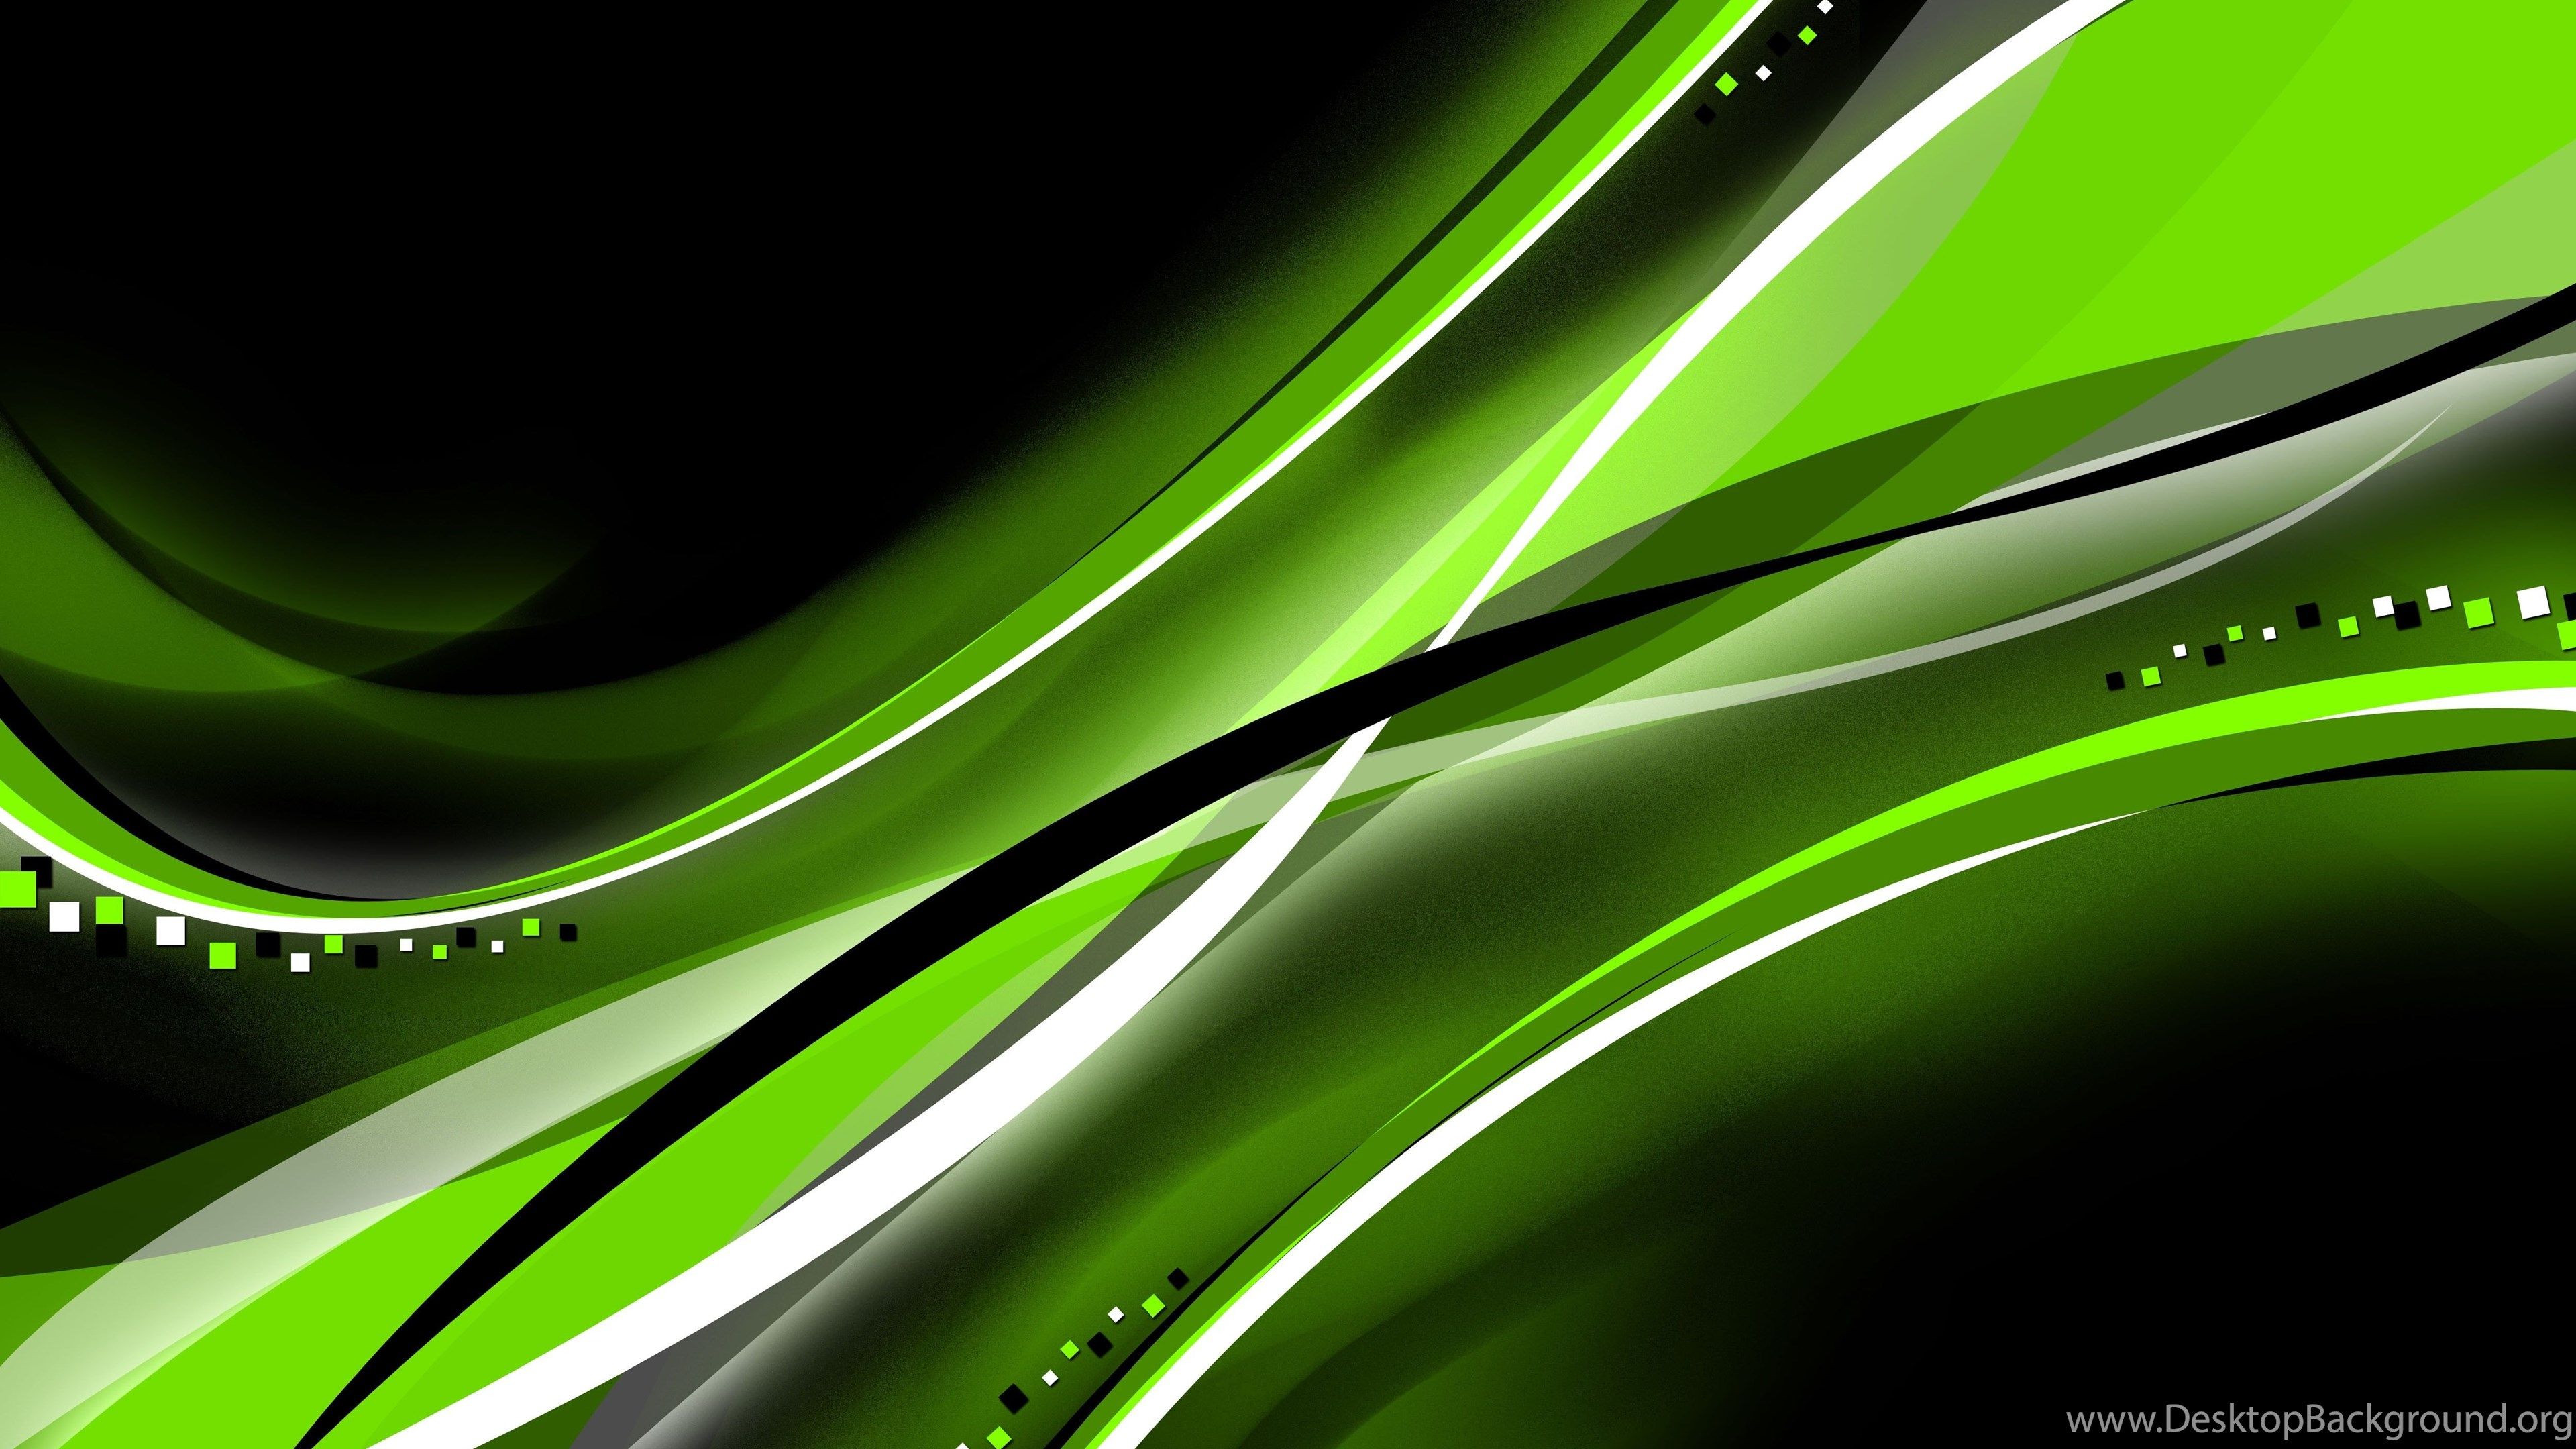 200+] Green Abstract Wallpapers | Wallpapers.com